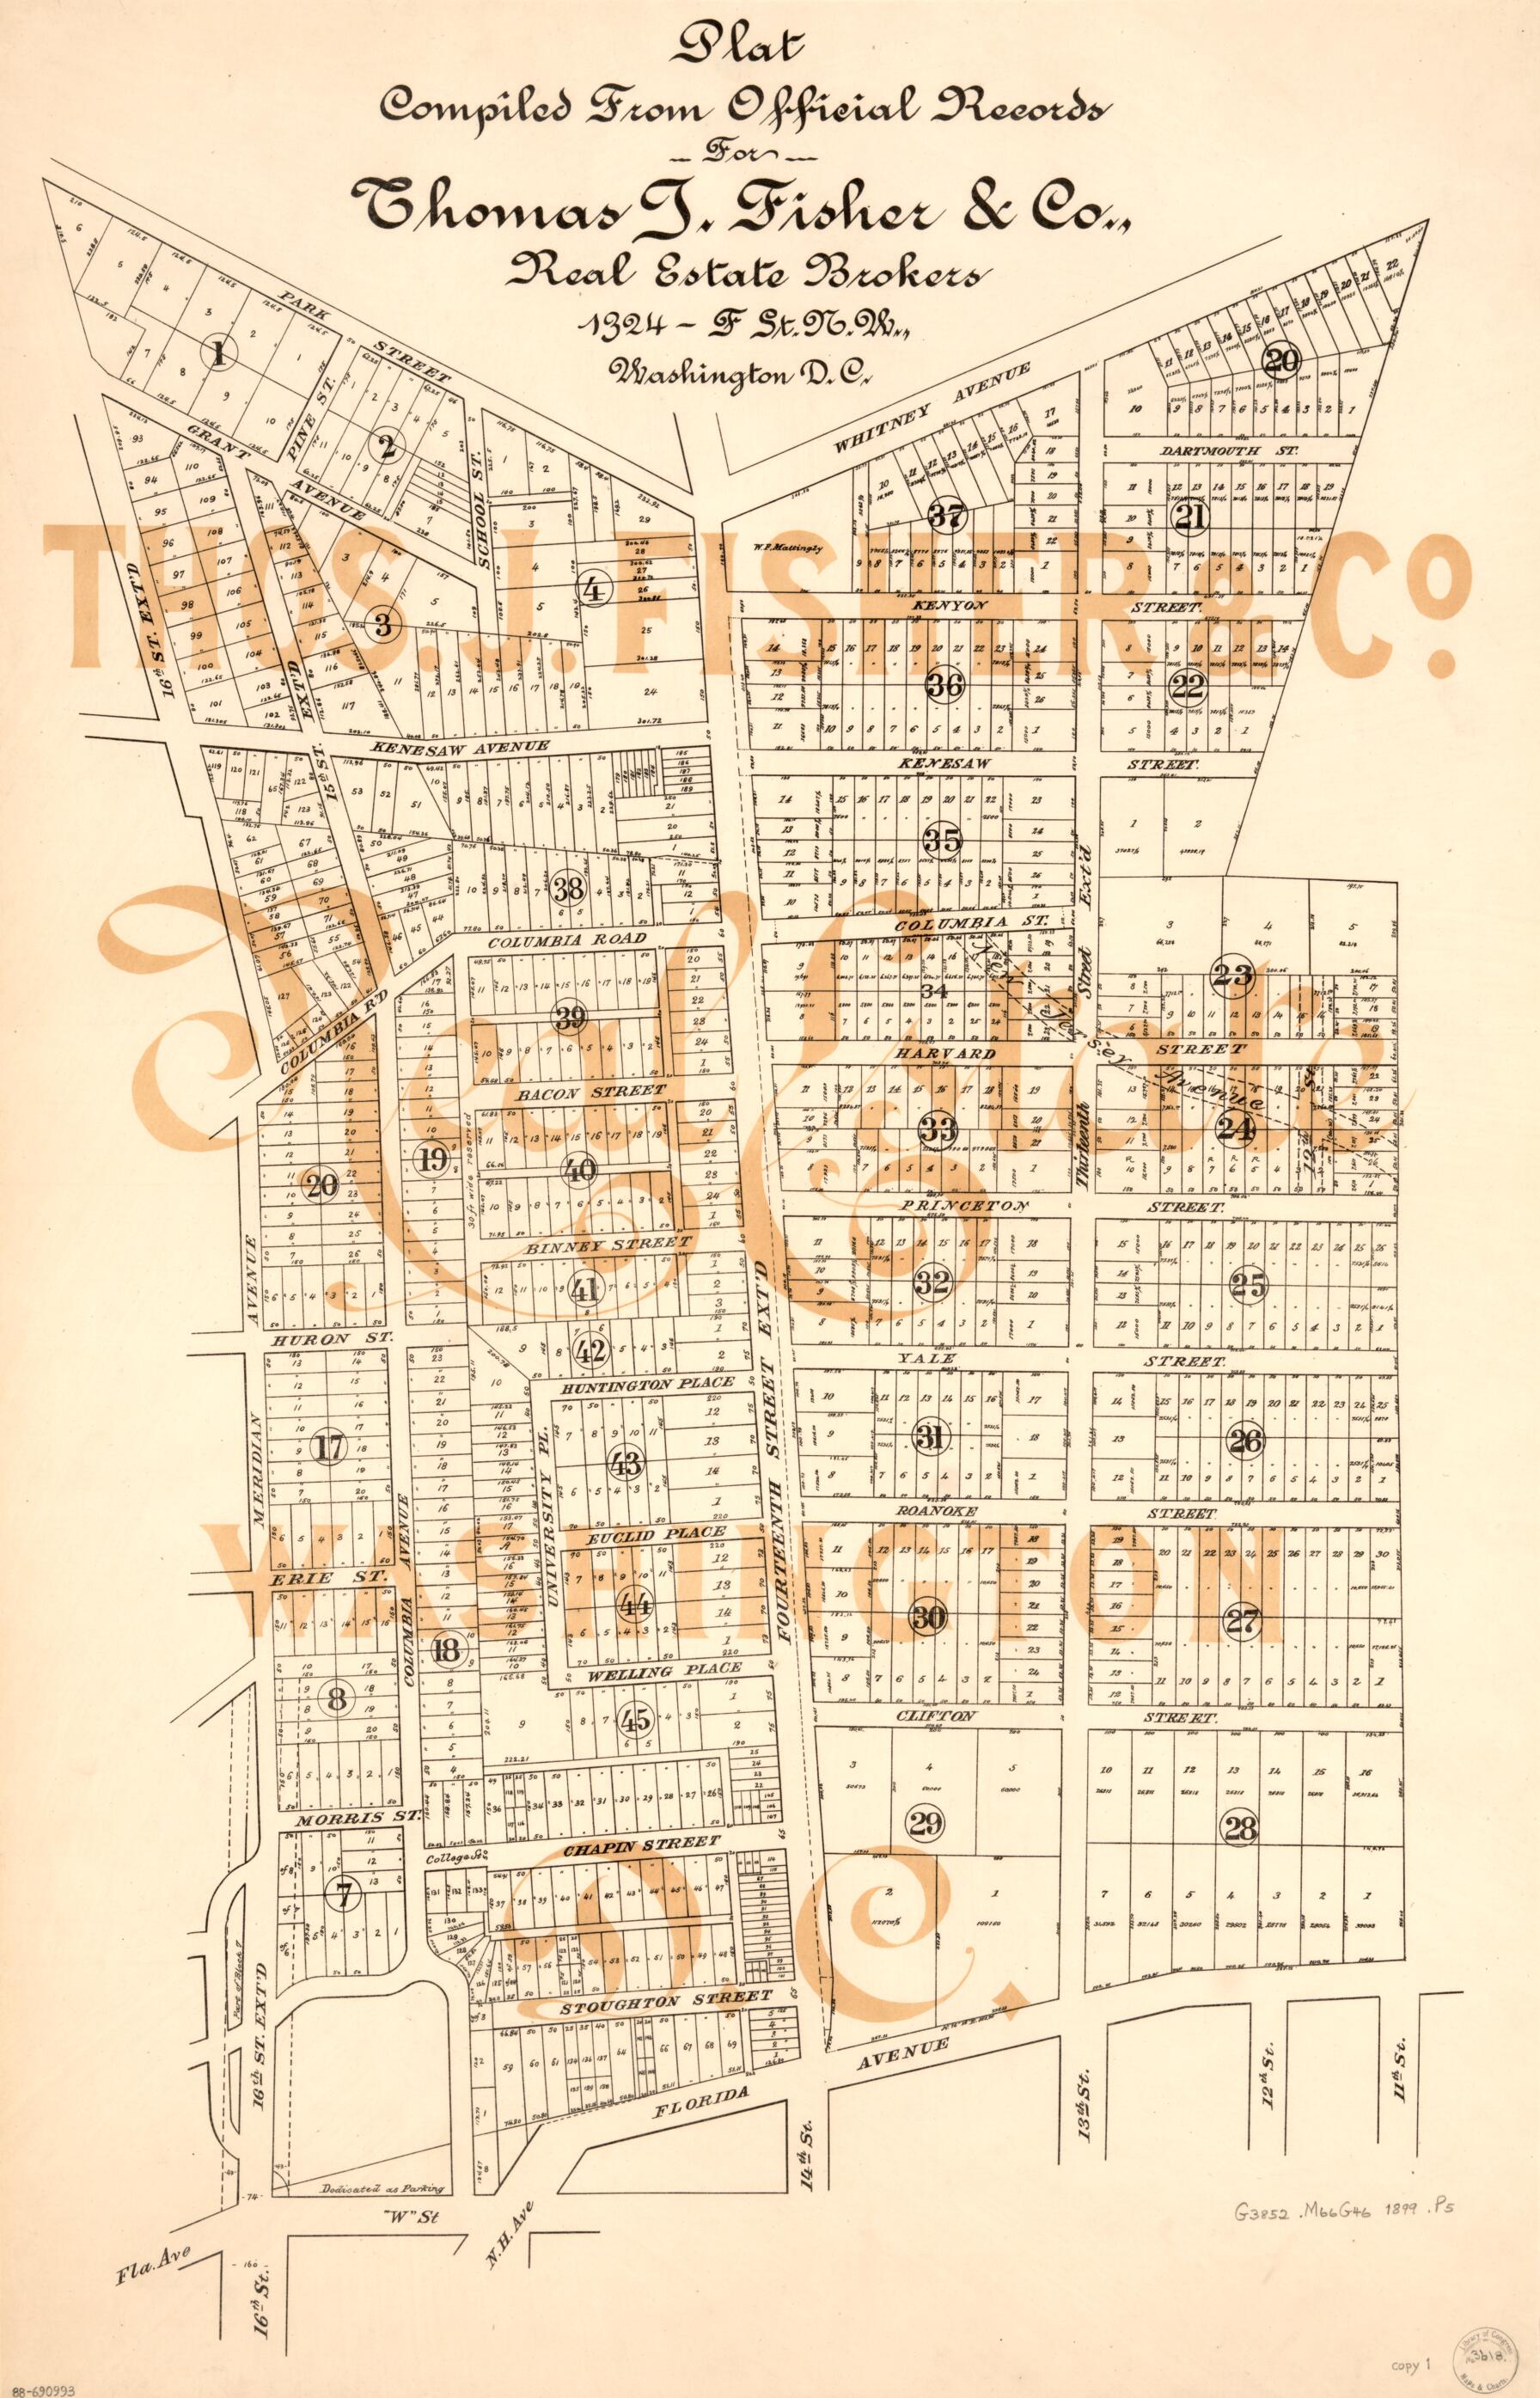 This old map of -F St. N.W., Washington D.C. : parts of Mount Pleasant, Meridian Hill, and Columbia Heights, Washington D.C. from 1899 was created by  Thos. J. Fisher and Co in 1899